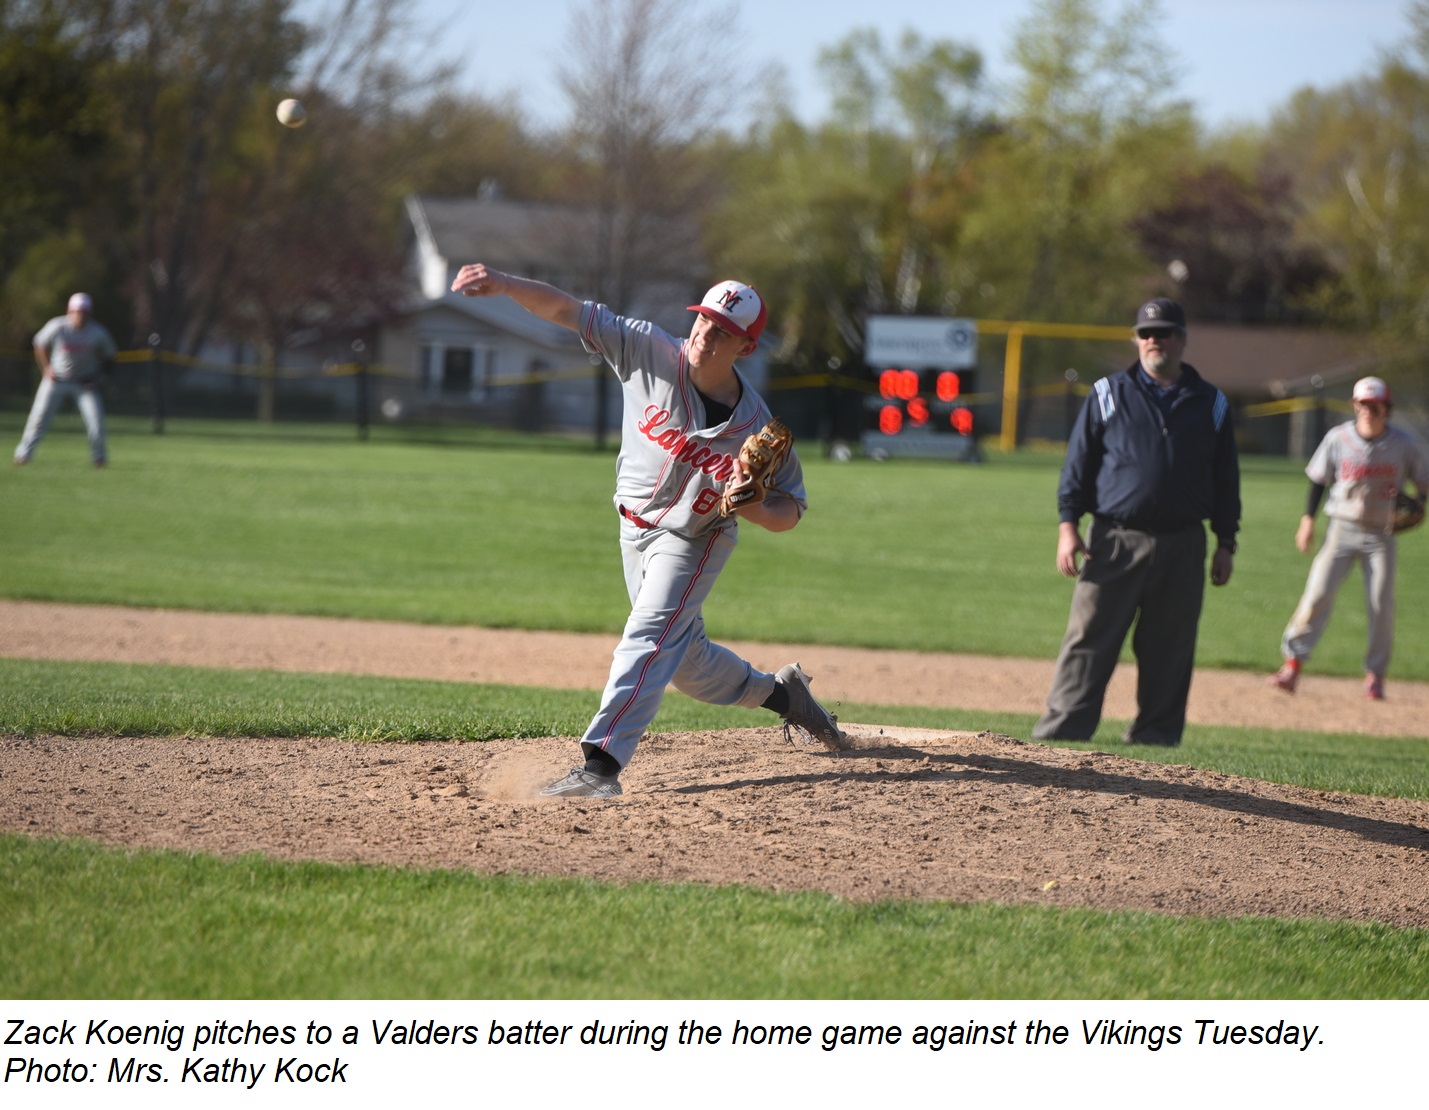 Zack Koenig pitches to a Valders batter during the Lancers' home baseball game Tuesday.